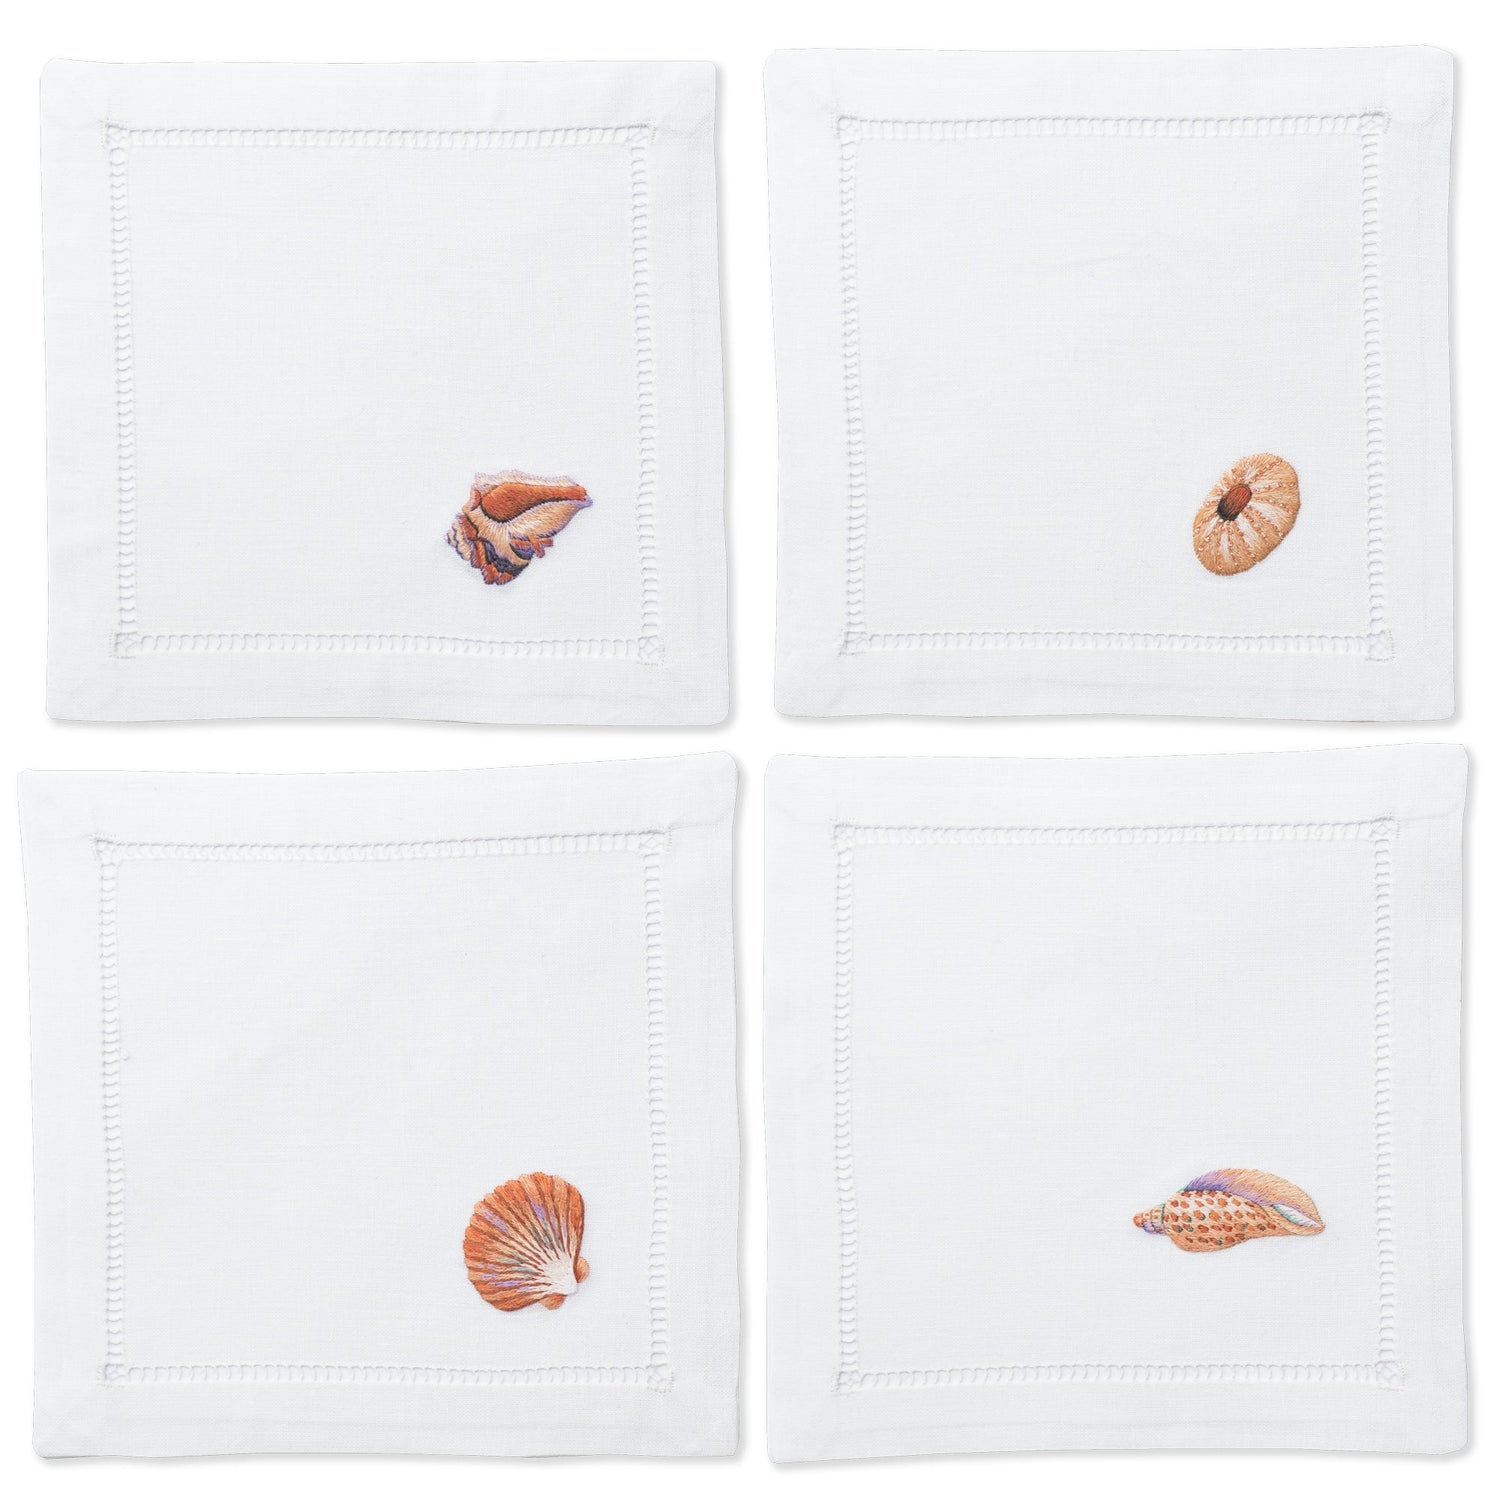 4 white cocktail napkins with a hemstitch border. Embroidered on the bottom right corner of each is a different blush colored shell